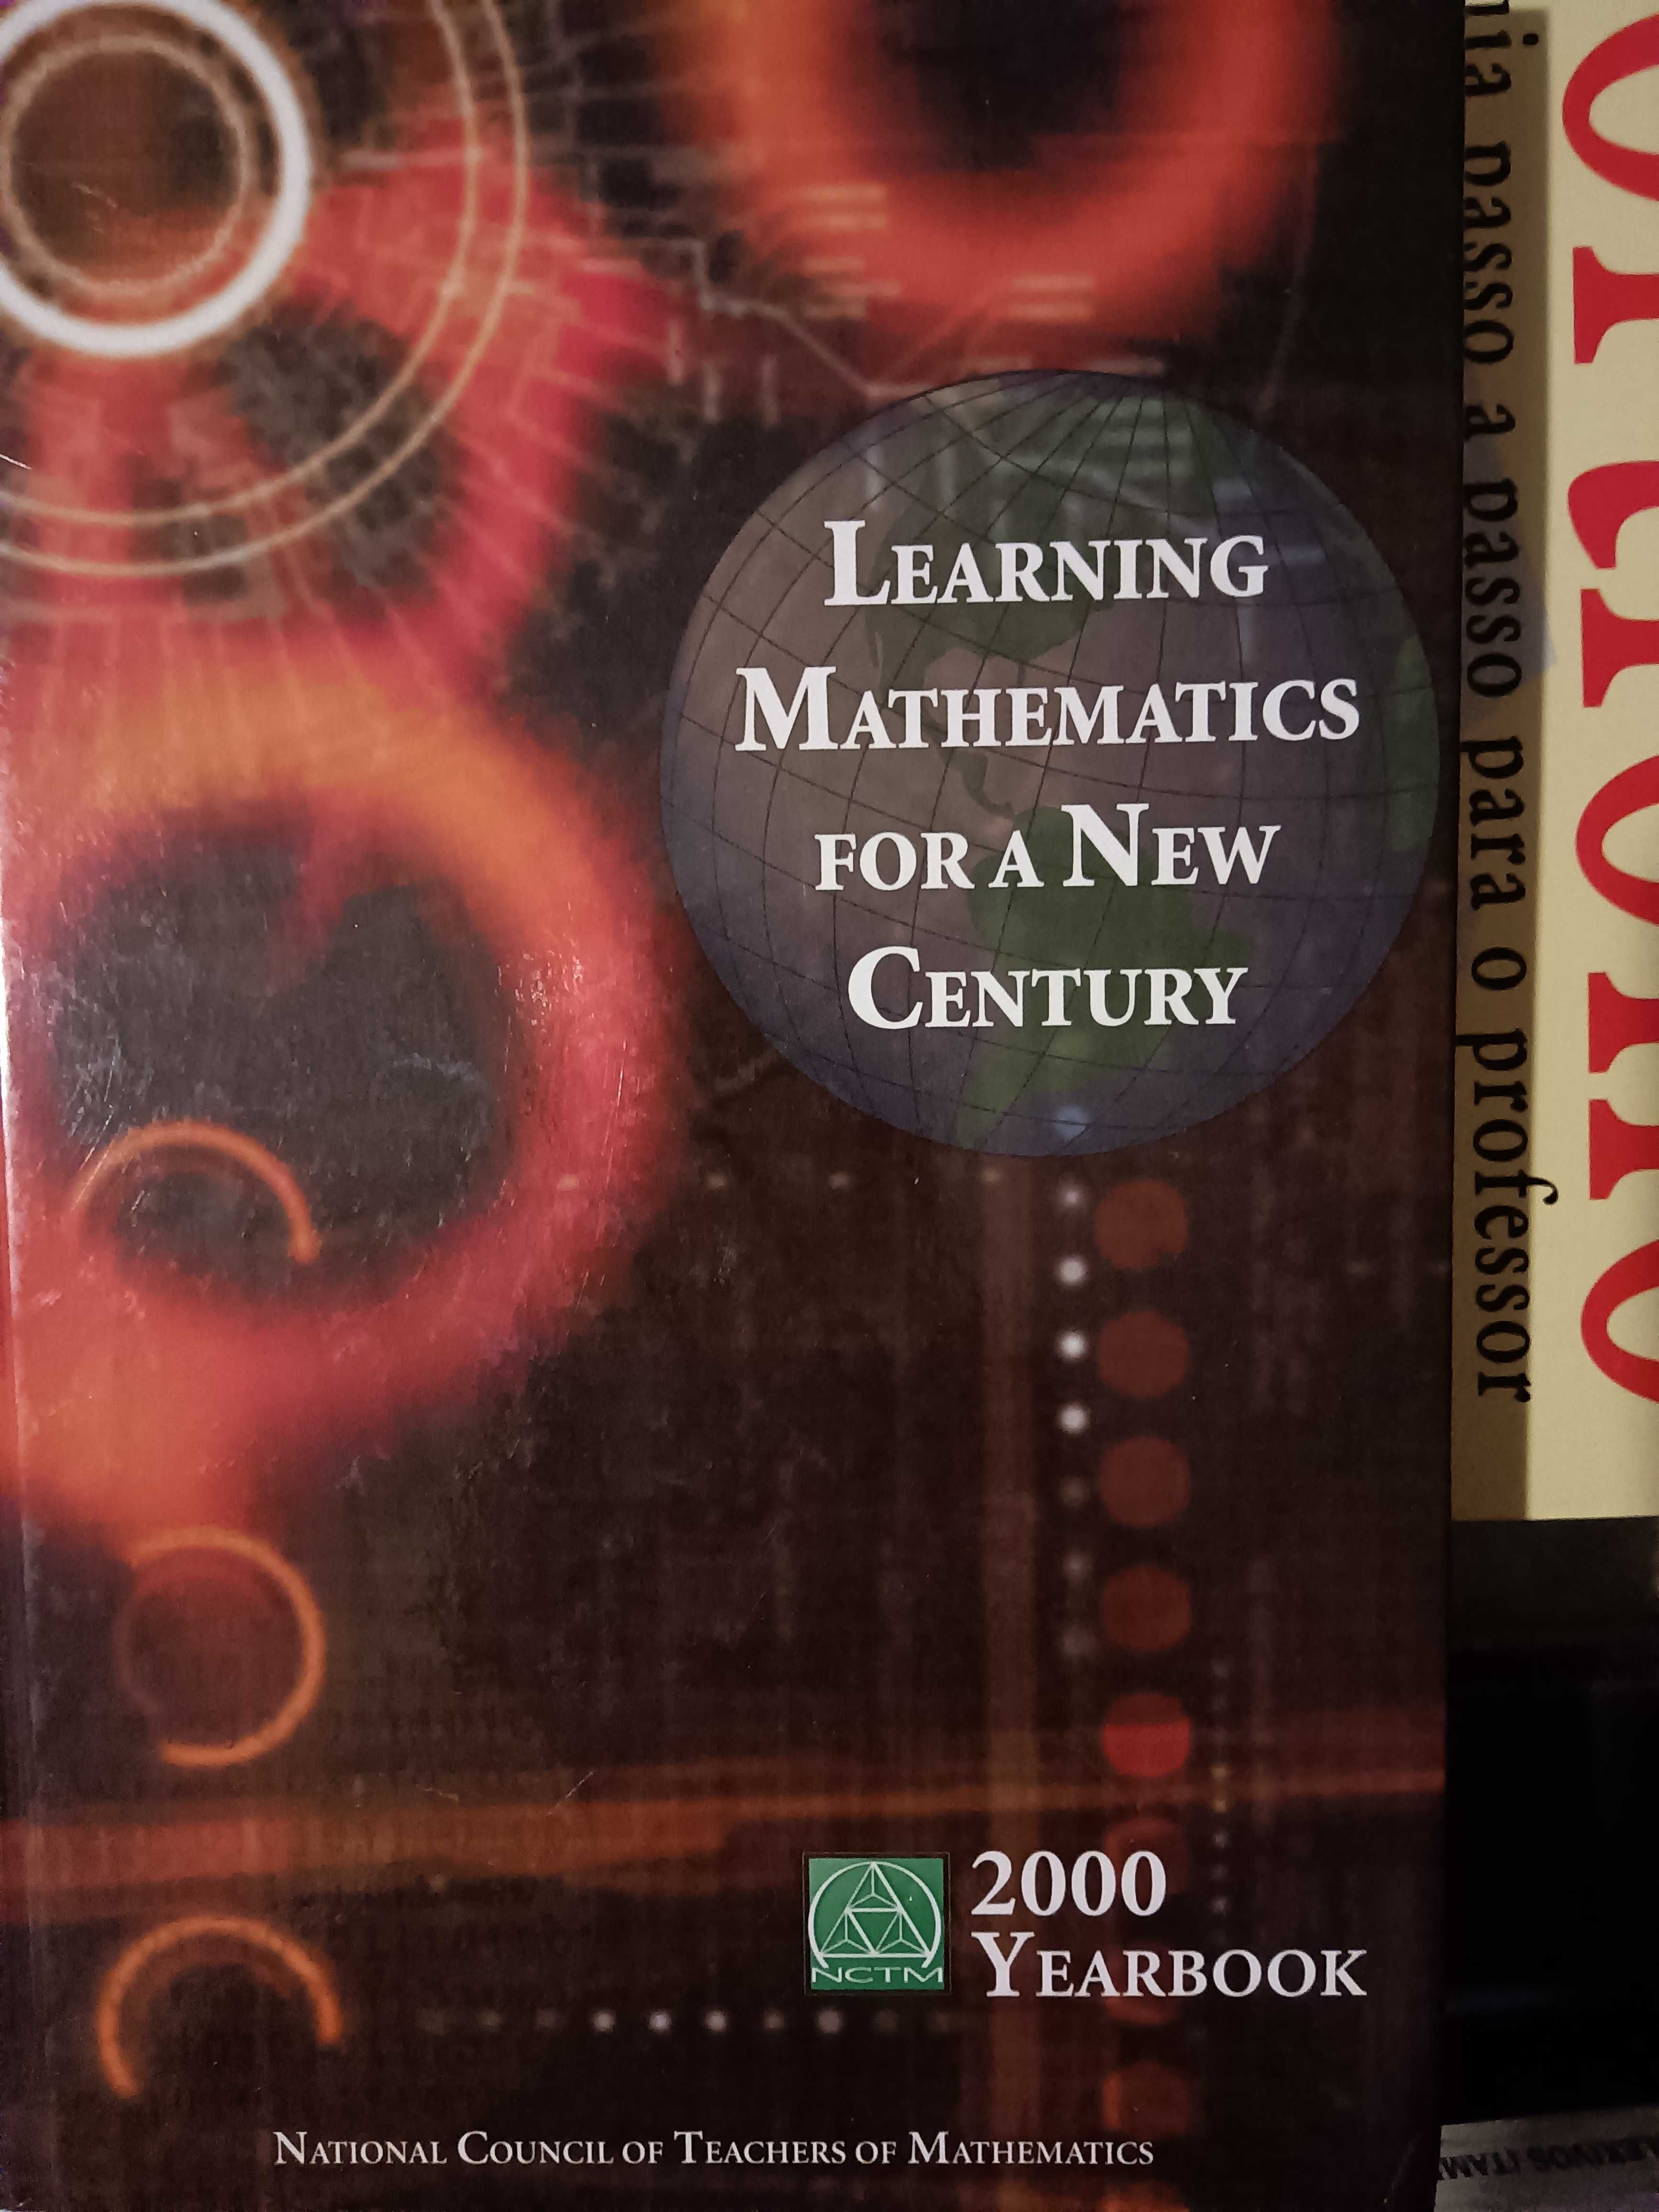 Learning Mathematics for a New Century_NCTM